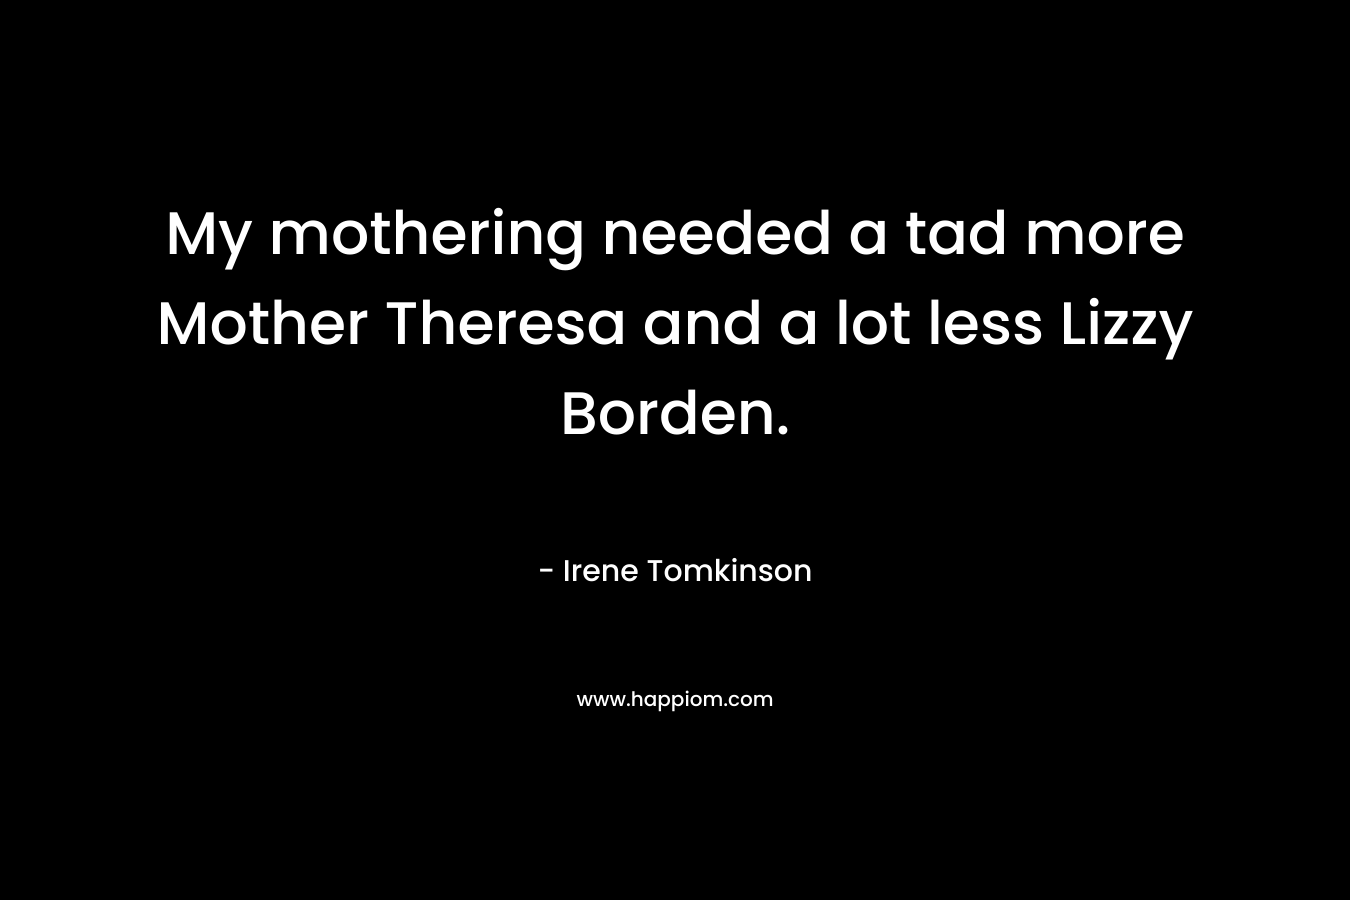 My mothering needed a tad more Mother Theresa and a lot less Lizzy Borden. – Irene Tomkinson